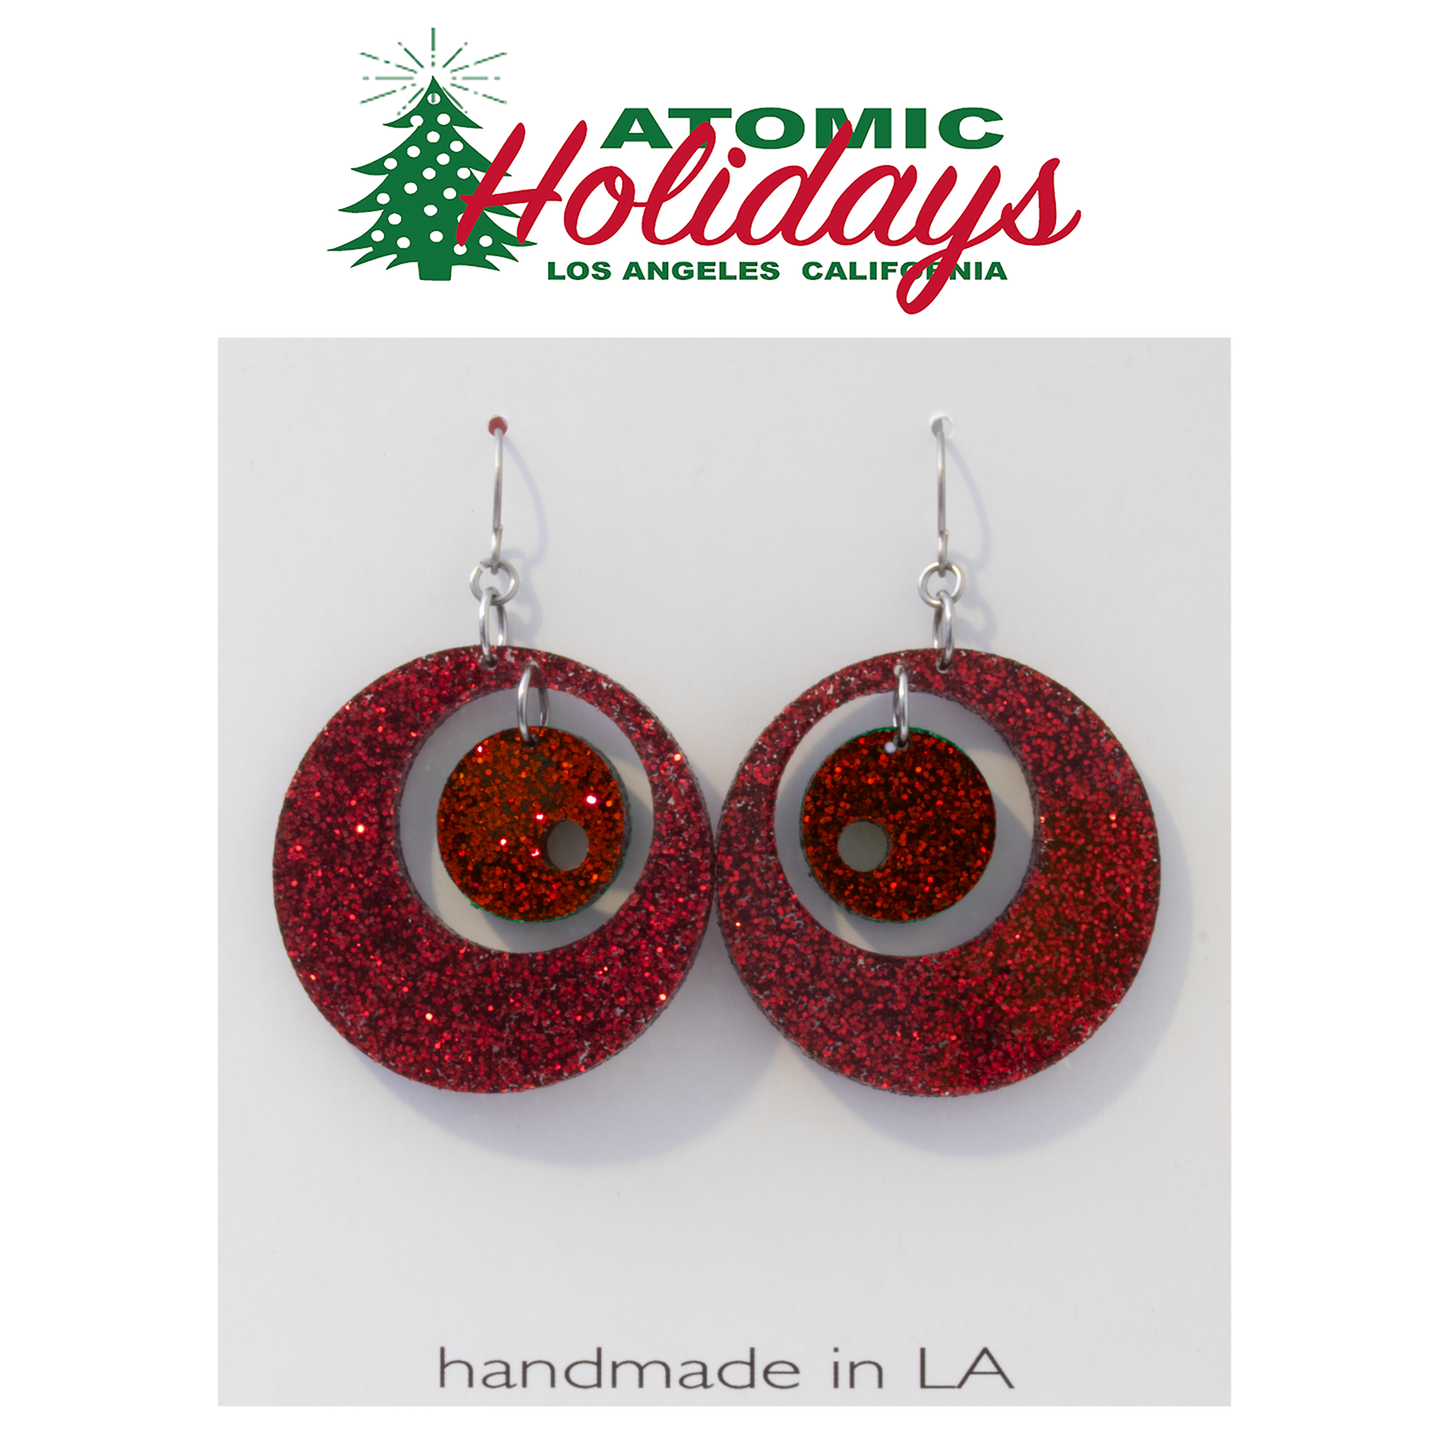 Atomic Holidays Statement Christmas Earrings in Glitter Red - mid century modern groovy style by AtomicMobiles.com 